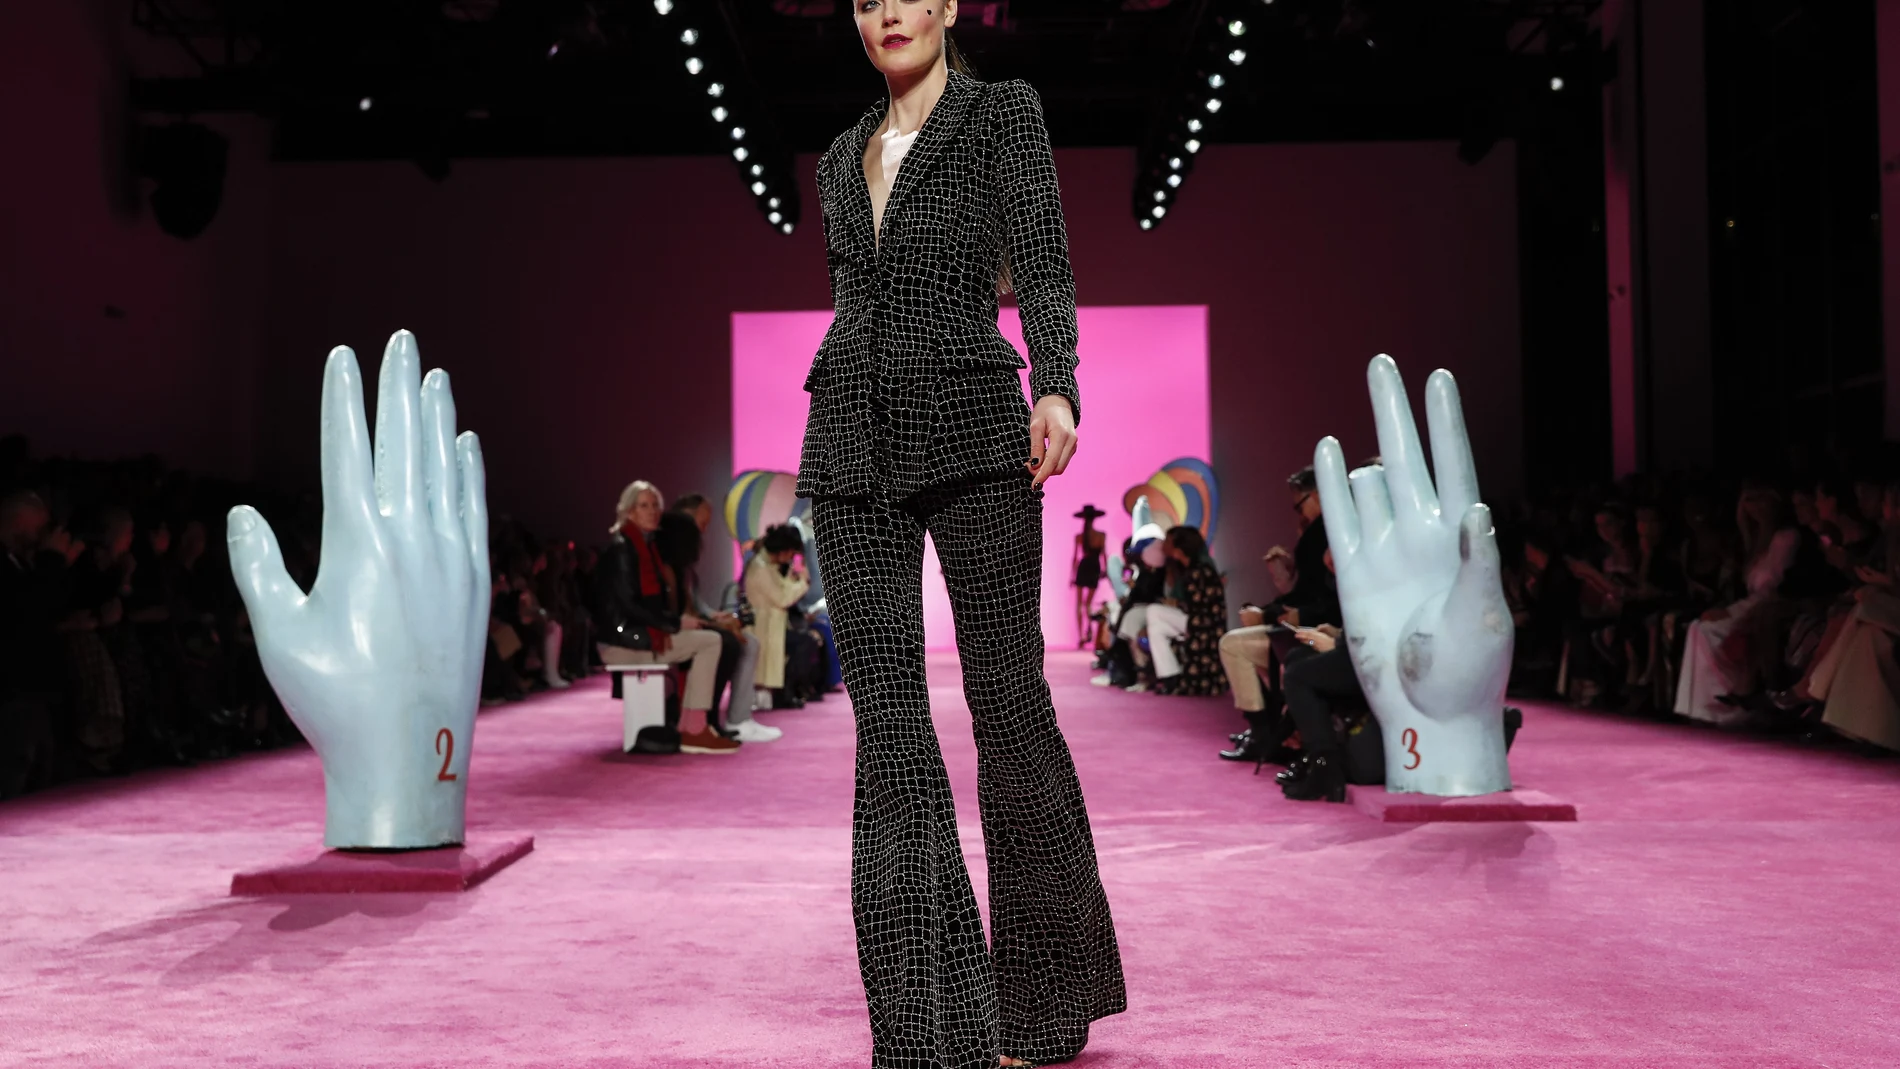 FILE - The Christian Siriano collection is modeled during Fashion Week in New York on Feb. 6, 2020. With no celebs in the front row, no paparazzi chasing models down the streets, no stiletto-heeled crowds and no live shows at all, is there even a point to doing Fashion Week in 2020? Well, yes, say organizers: Itâ€™s about business. And jobs. And survival. (AP Photo/John Minchillo, File)